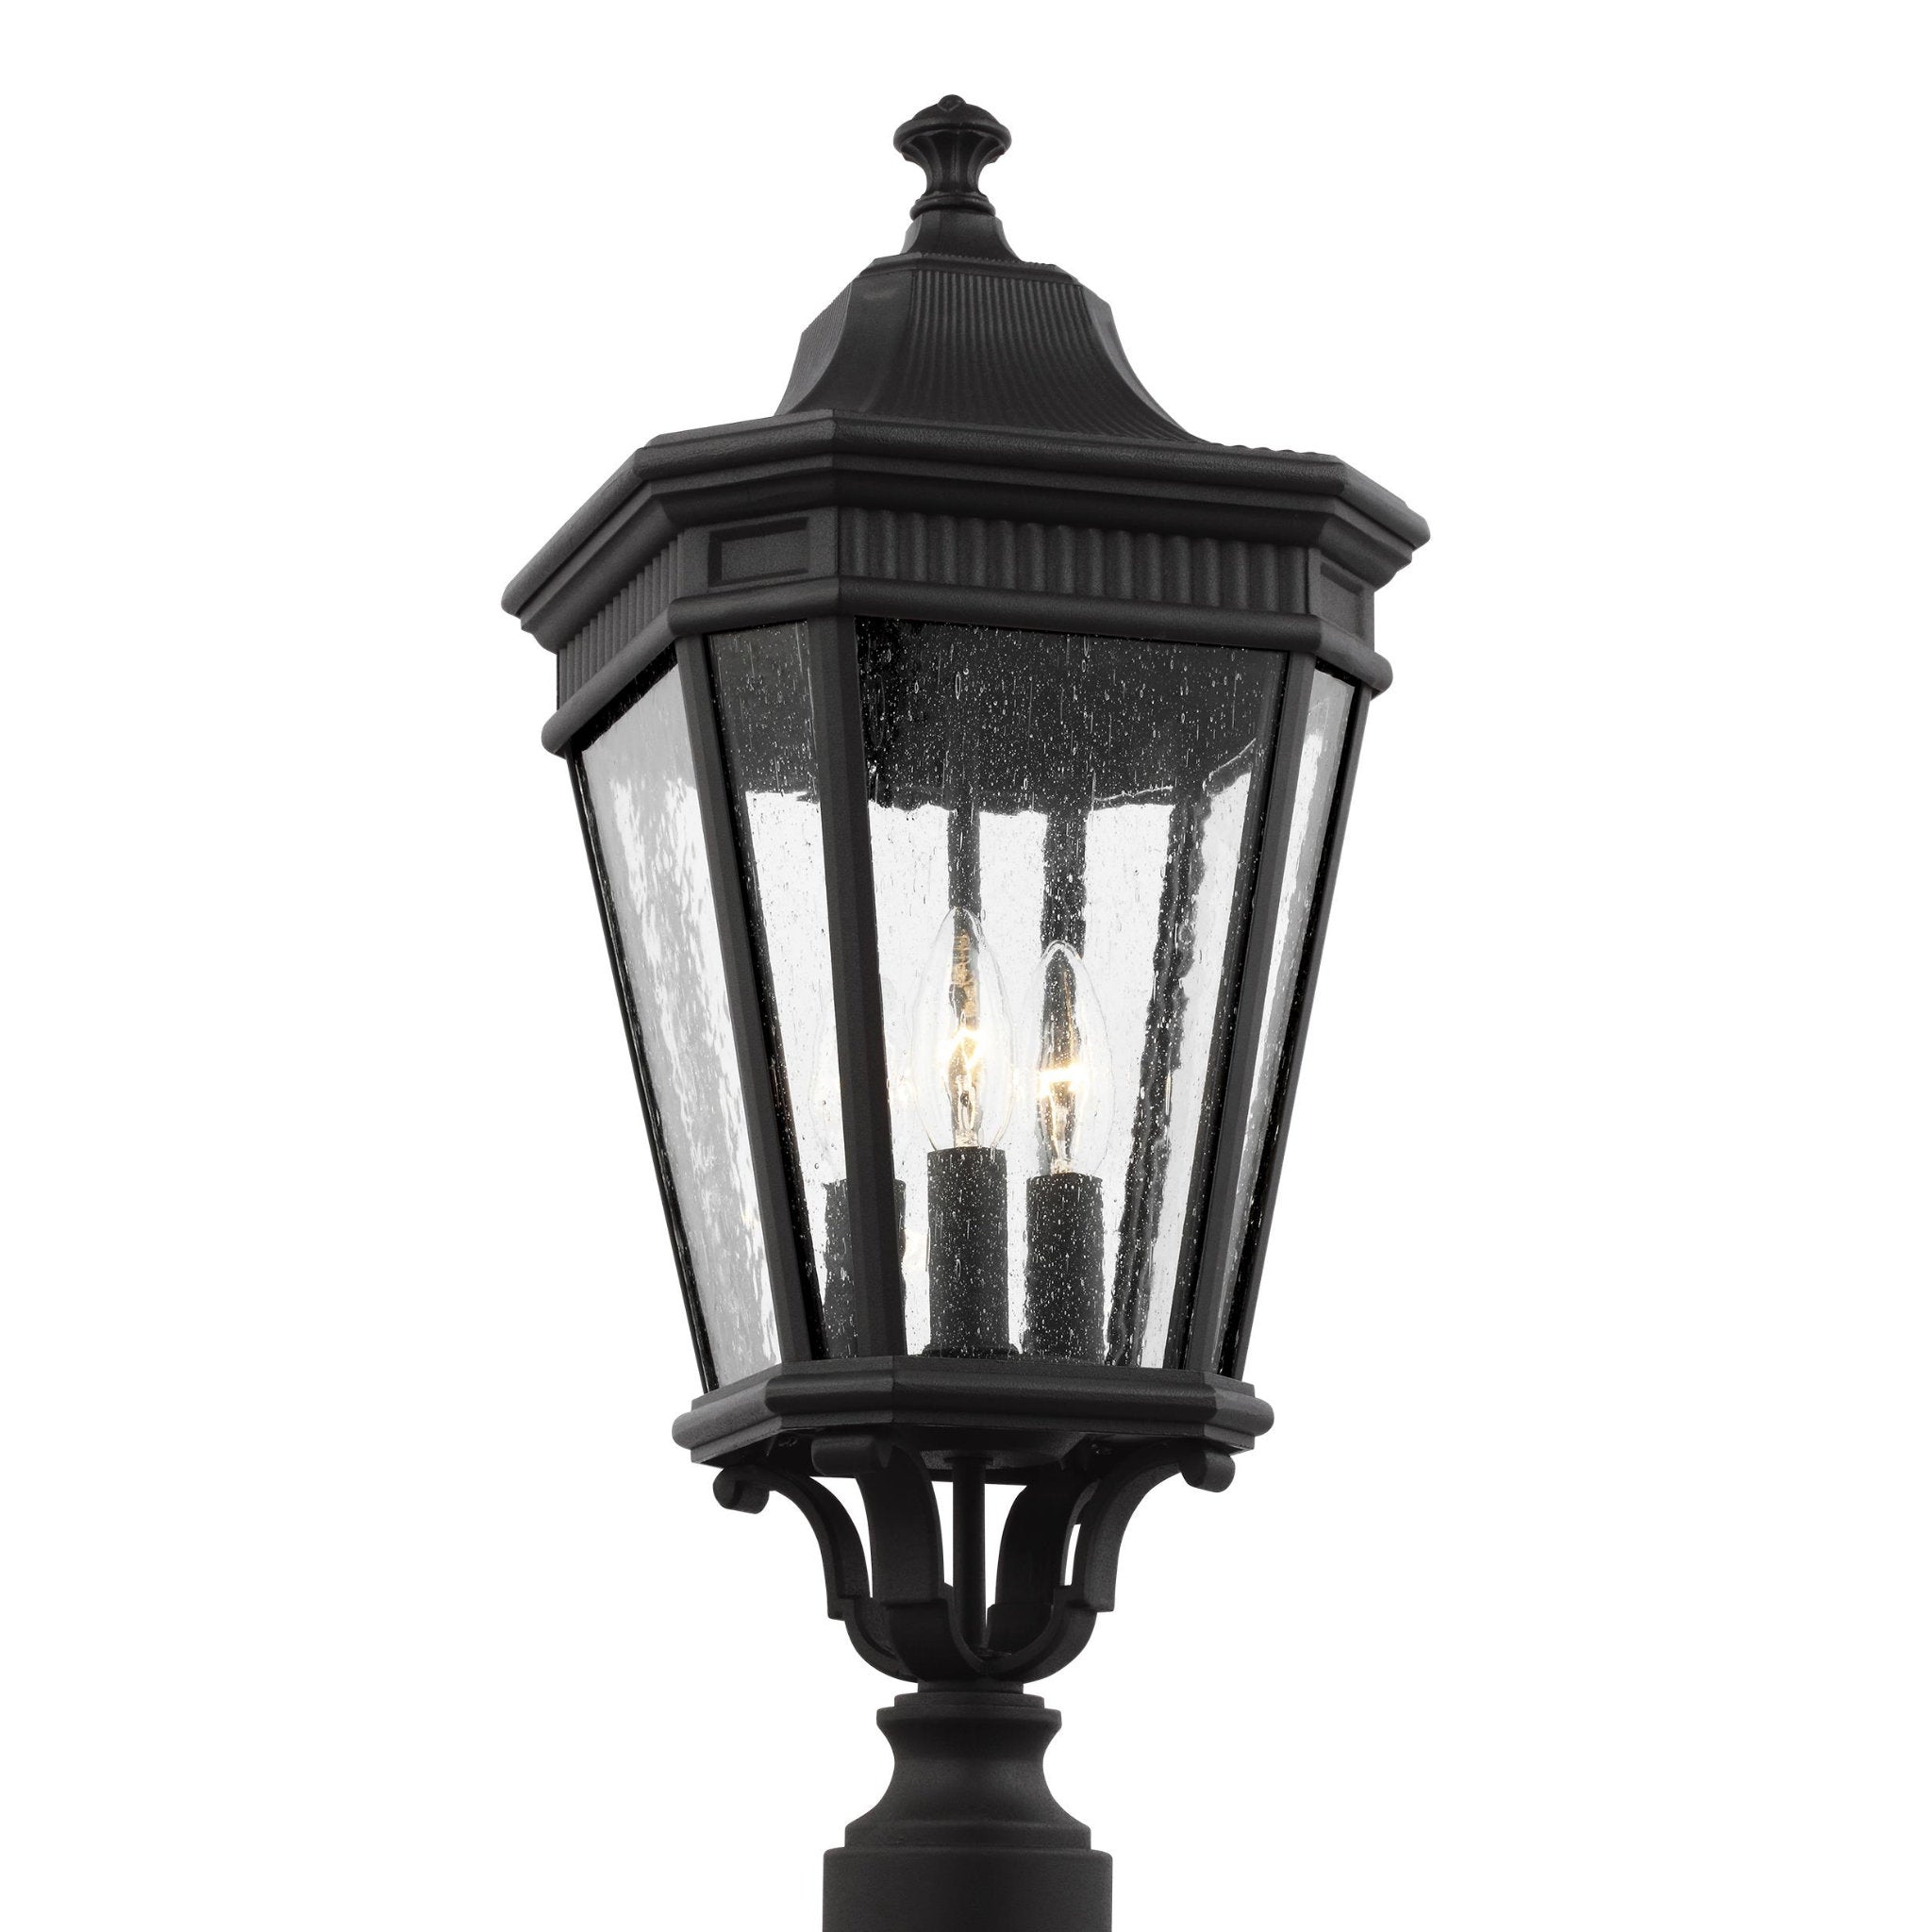 Cotswold Lane Small Post Lantern Traditional Outdoor Fixture 9.5" Width 22.5" Height Aluminum Irregular Clear Seeded Shade in Black